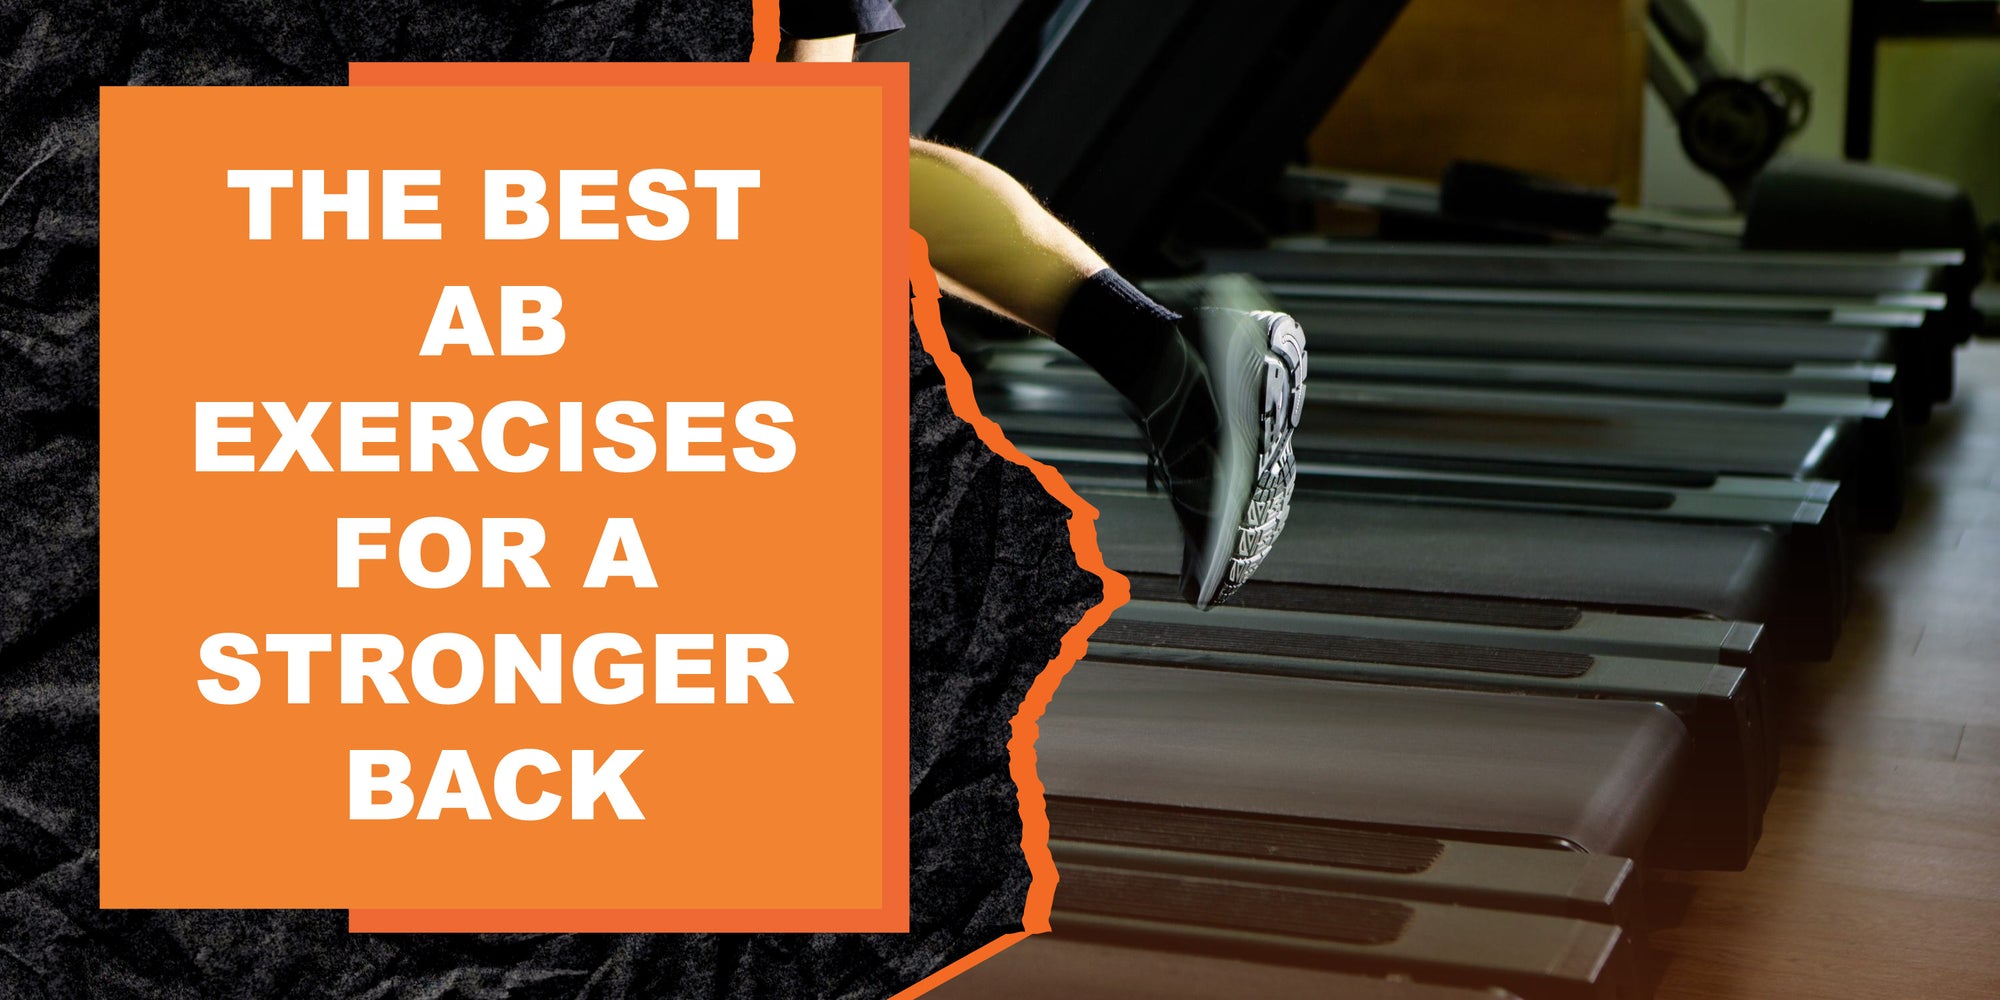 The Best Ab Exercises for a Stronger Back